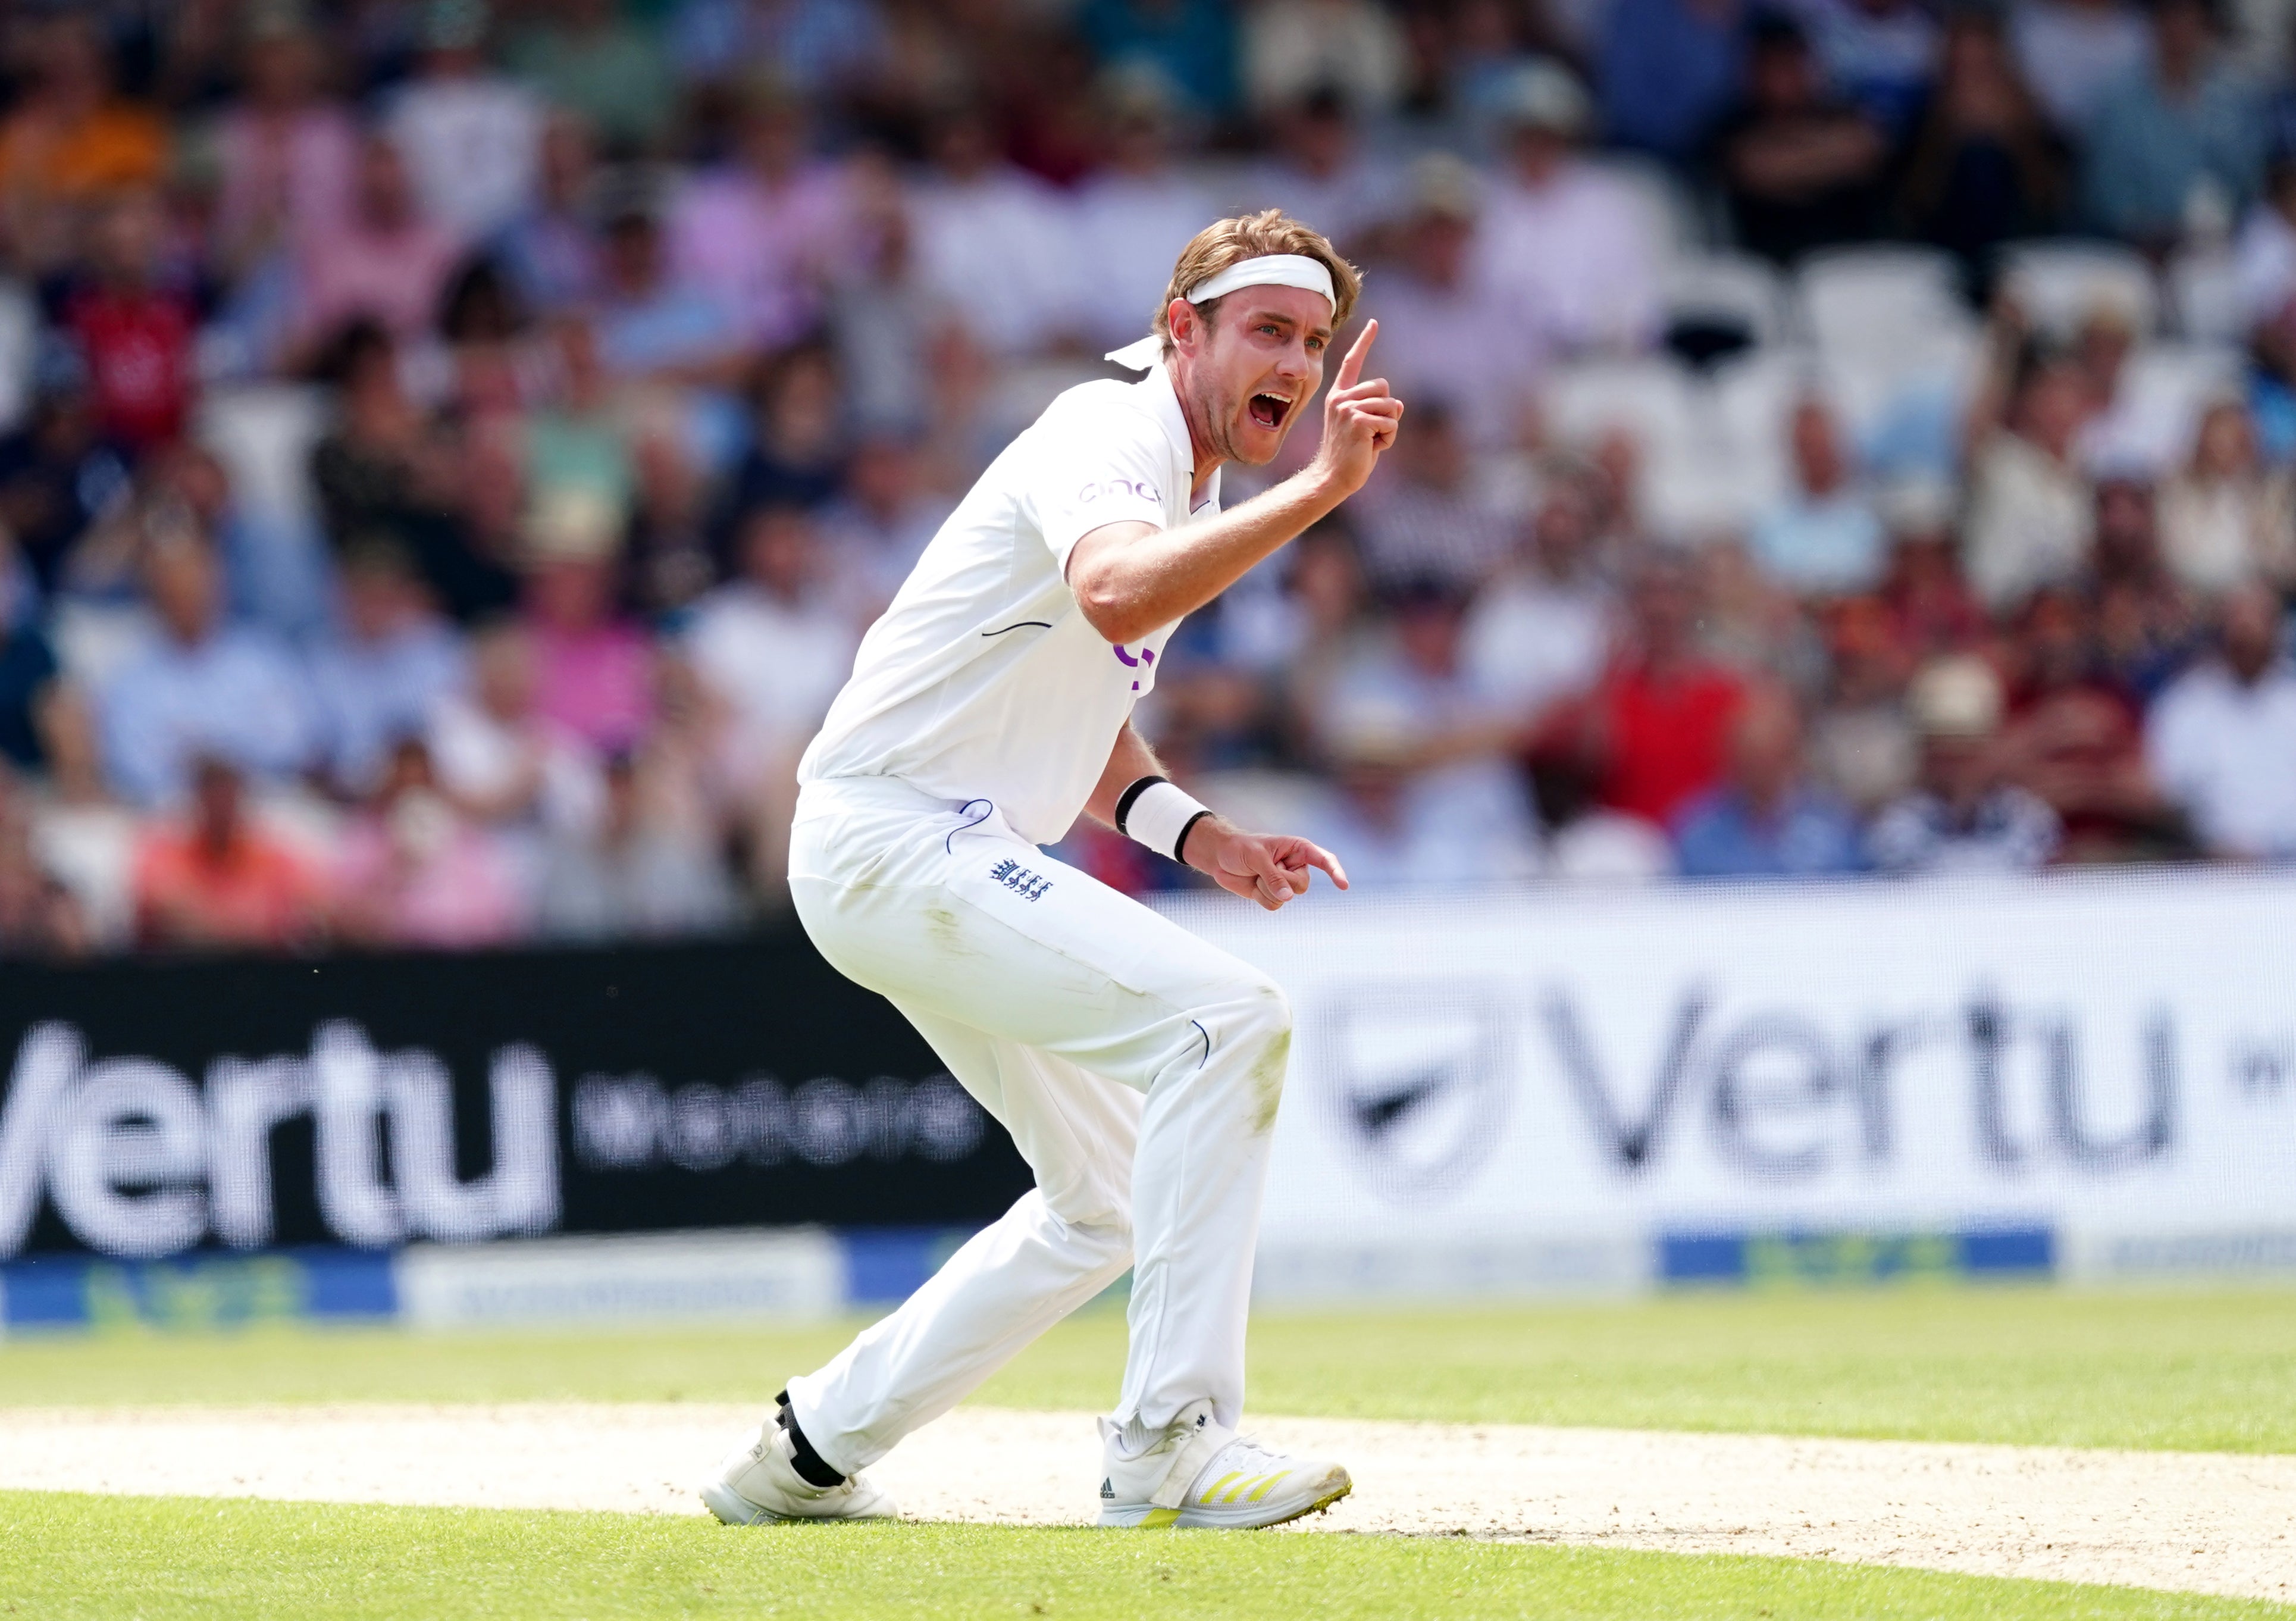 Stuart Broad appeals during an impressive spell in the England attack